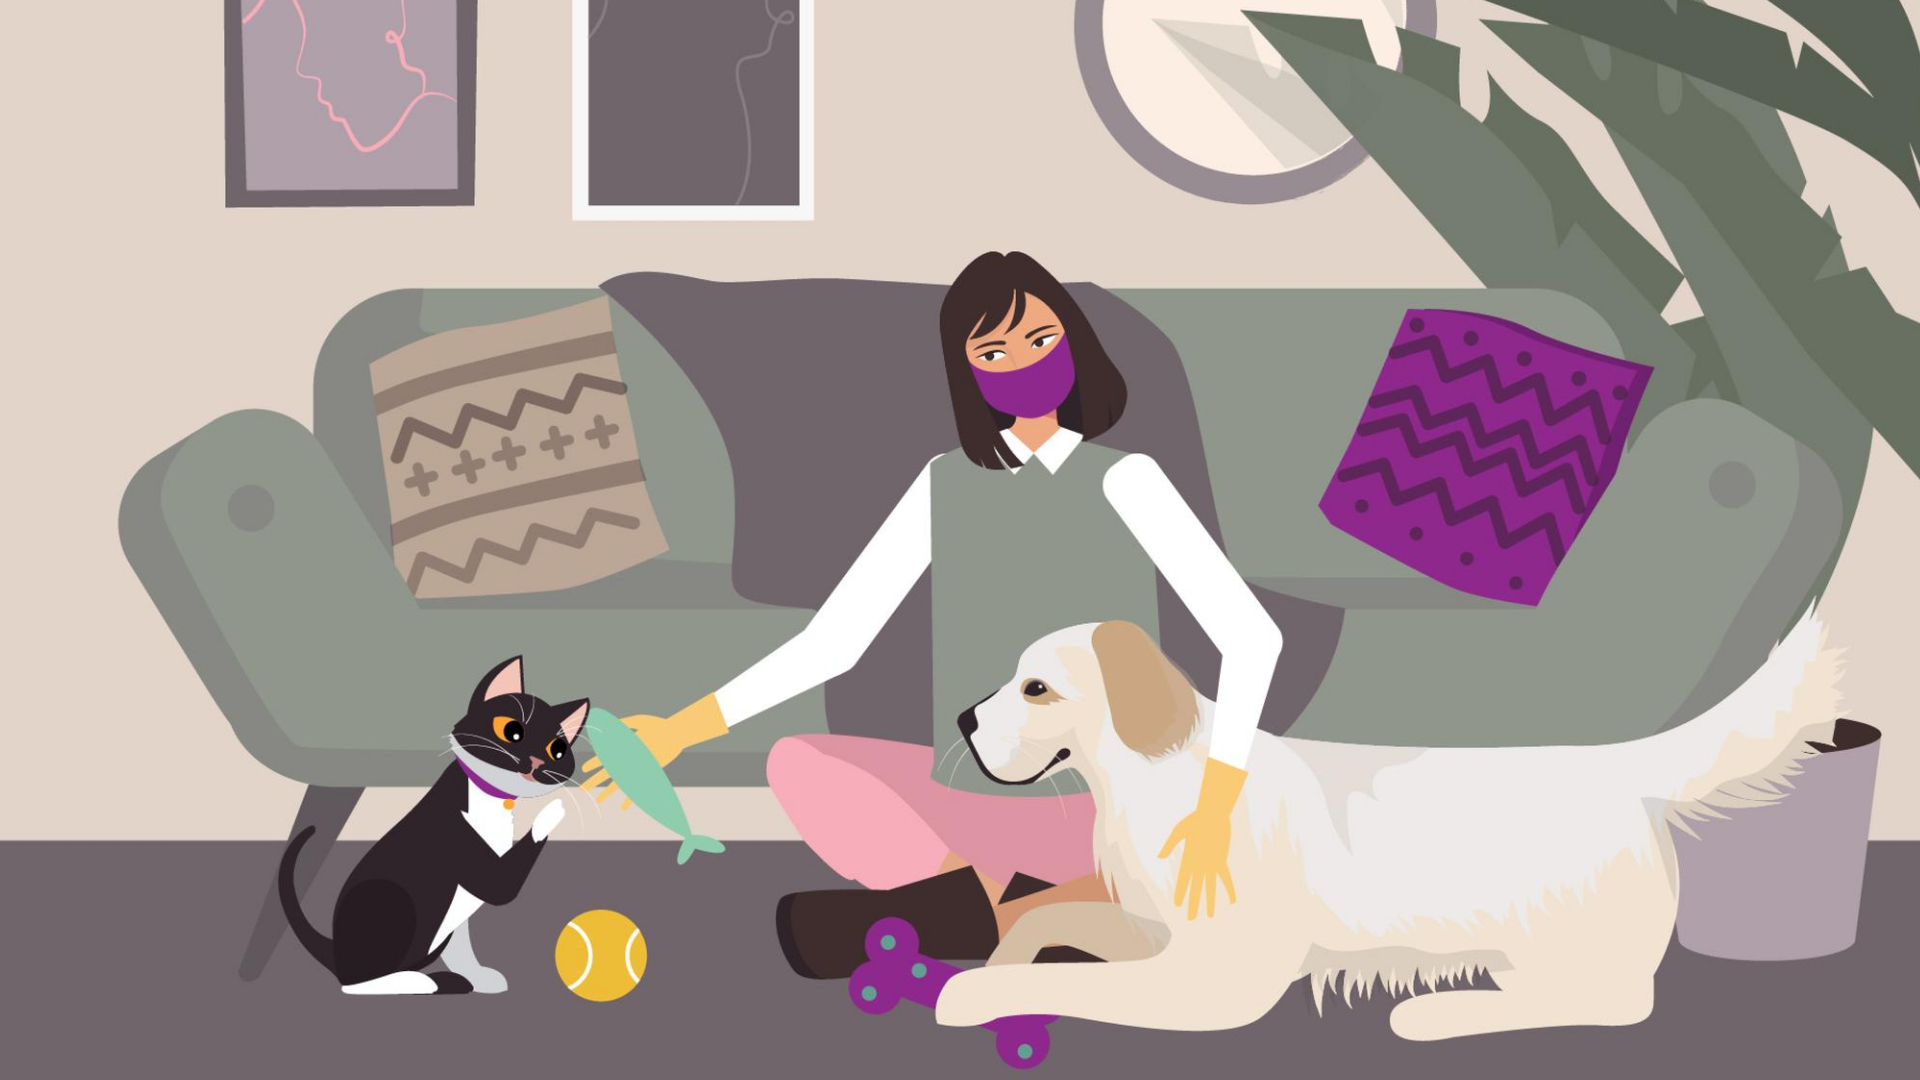 Advertising Animated Video "Take care of your pet remotely"